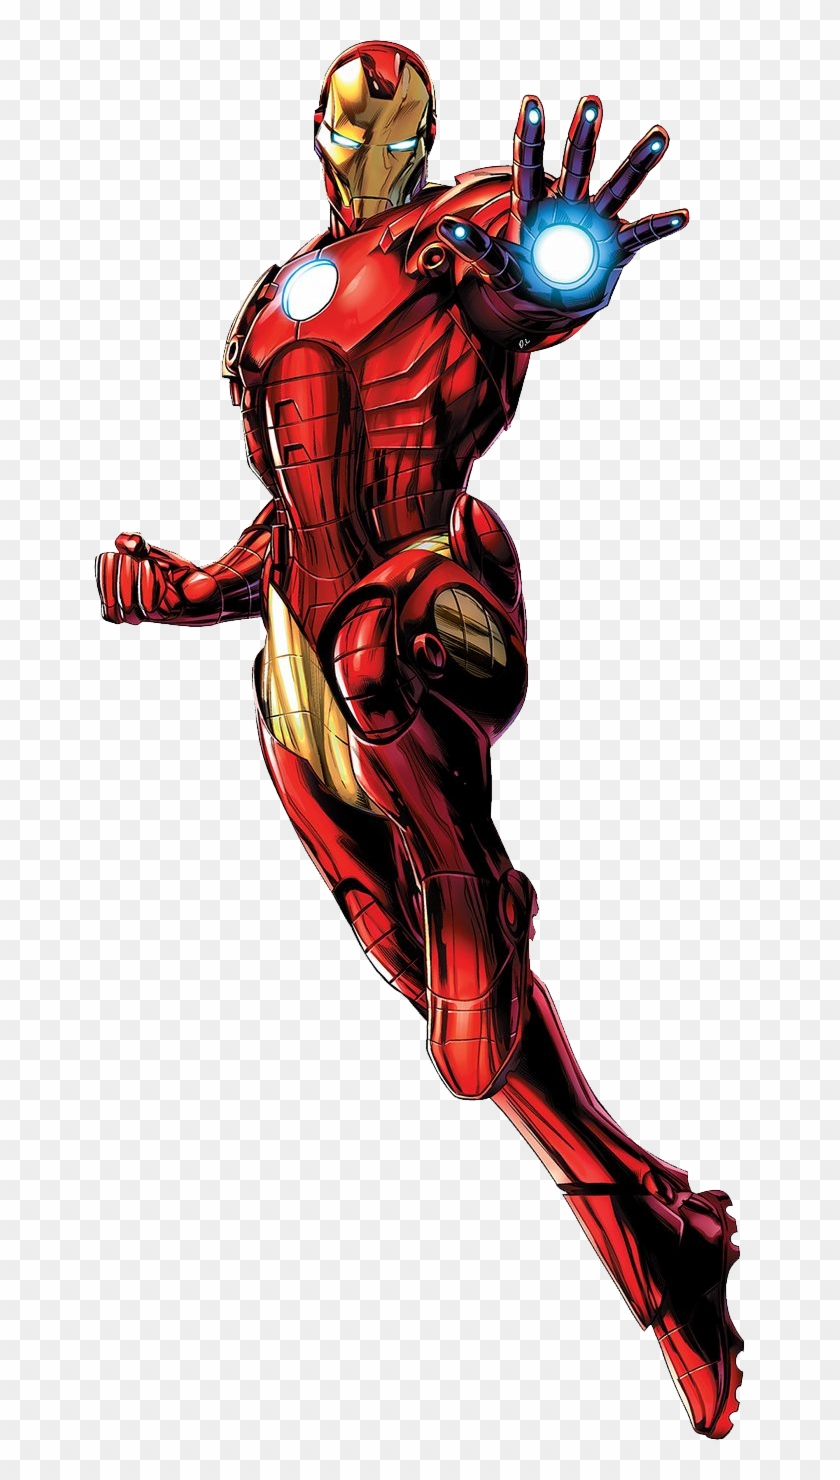 Download - Marvel Avengers Assemble Iron Man, HD Png Download -  651x1400(#359266) - PngFind